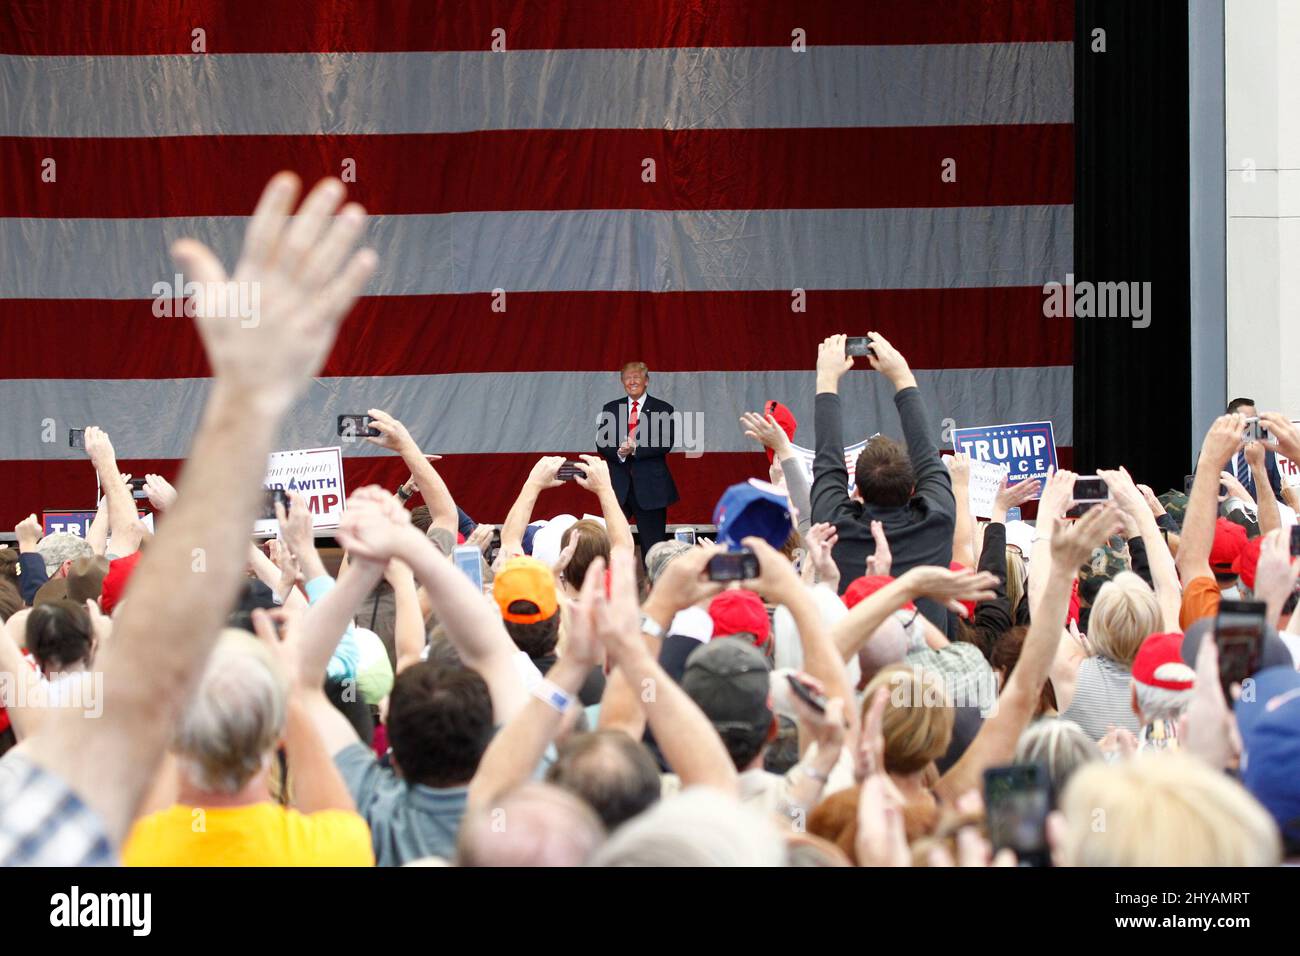 Donald Trump Supporters Republican Presidential candidate Donald Trump addresses supporters during a rally at the Henderson Pavilion Stock Photo